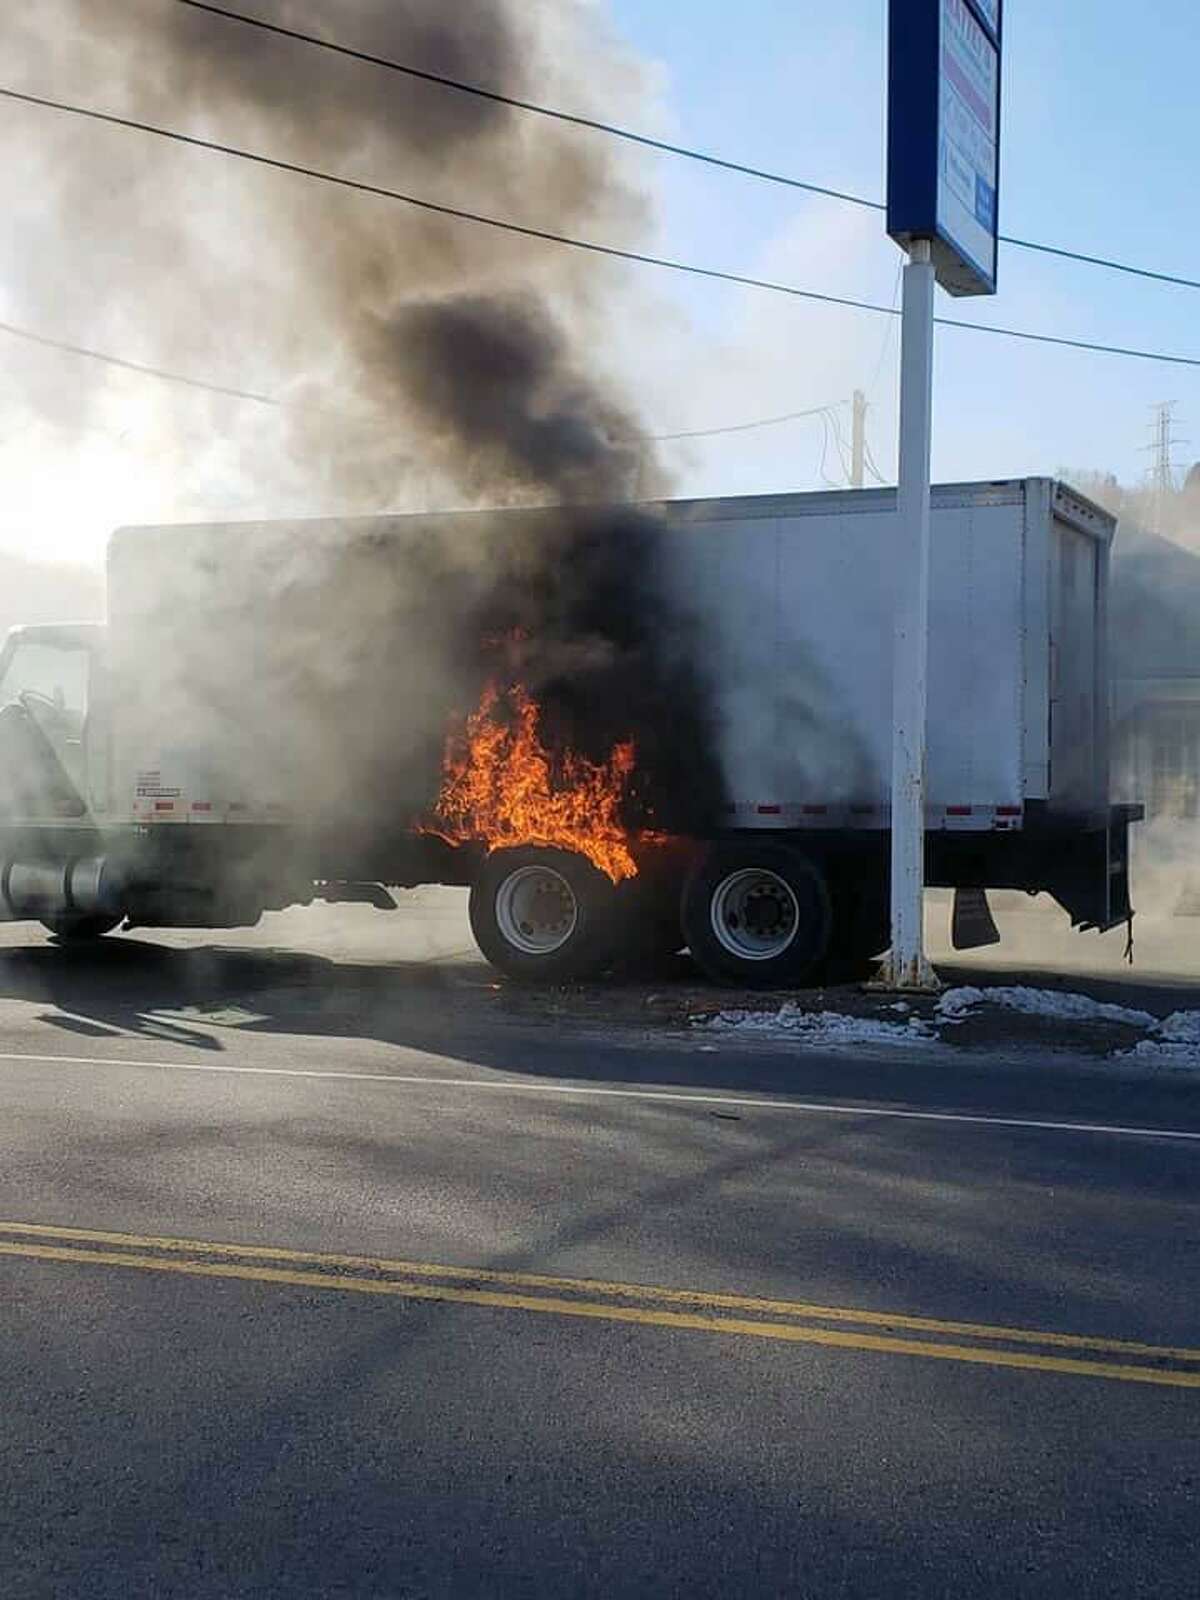 Derby, Conn., firefighters extinguished a fire on a truck on Nov. 23, 2018.